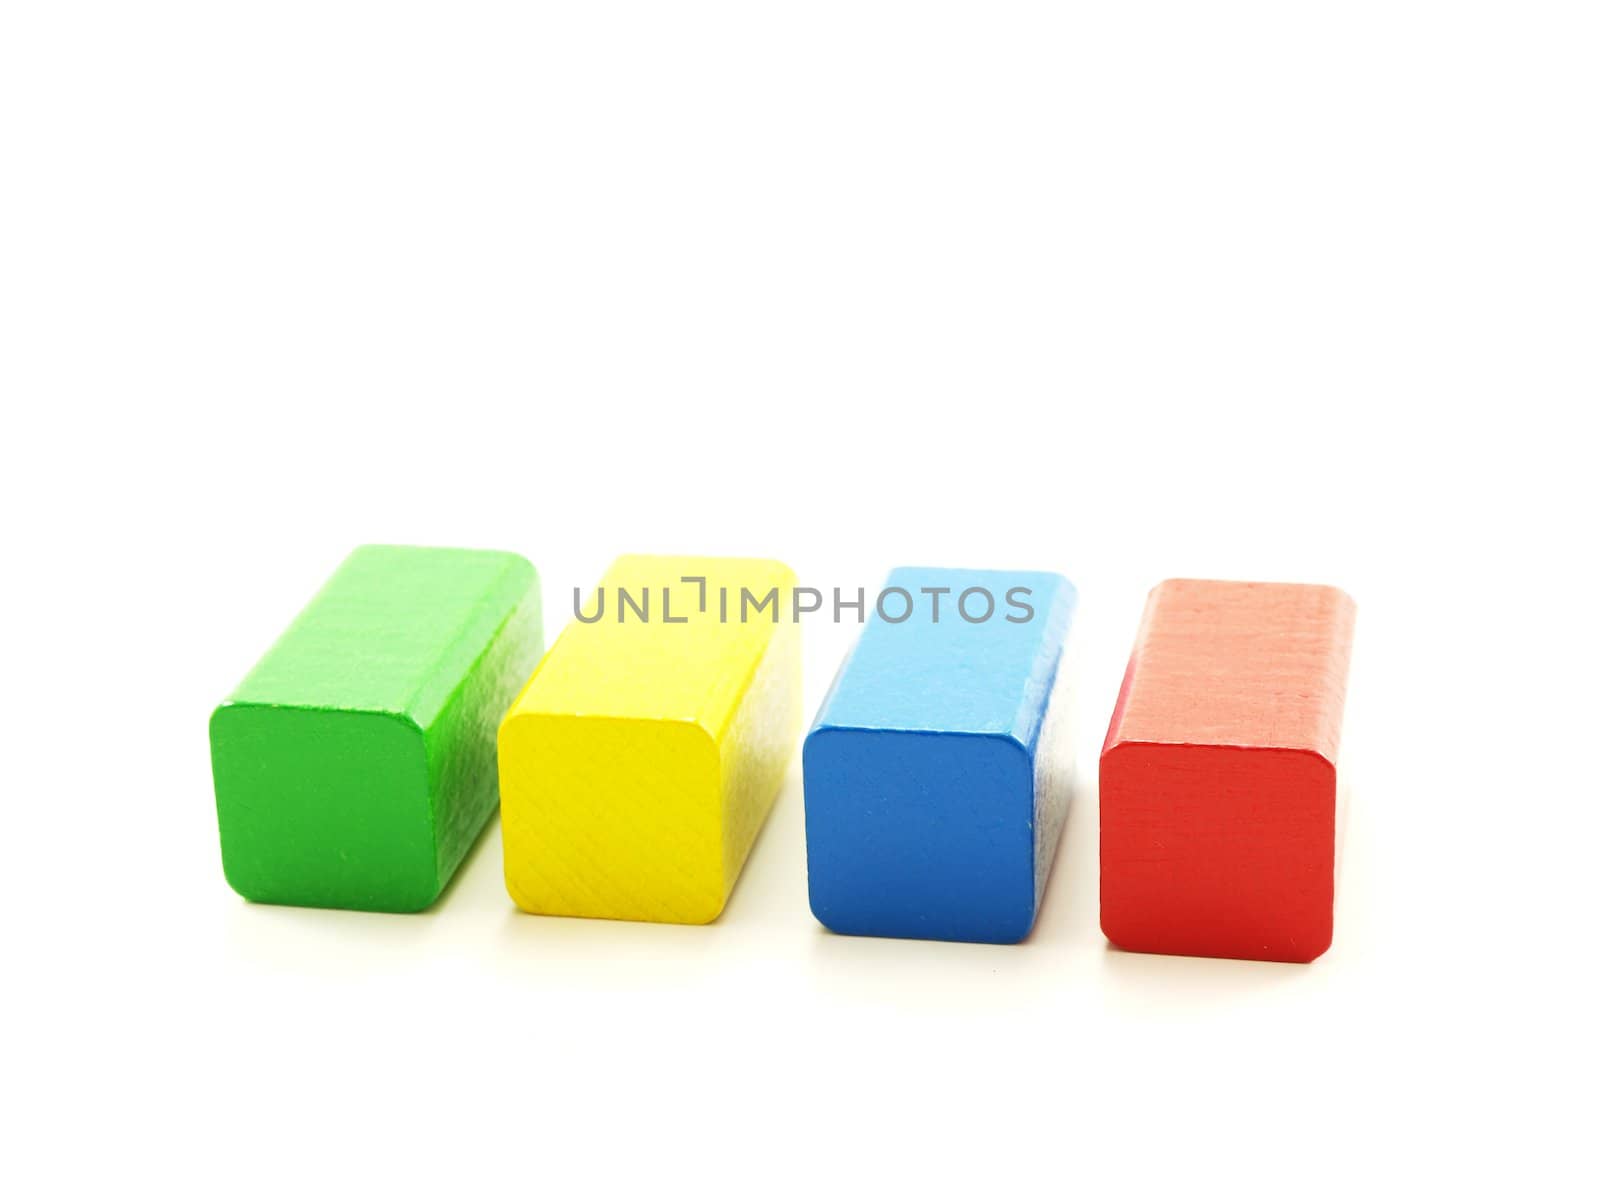 Rectangular wooden shaped pieces, assorted colors, isolated towards white